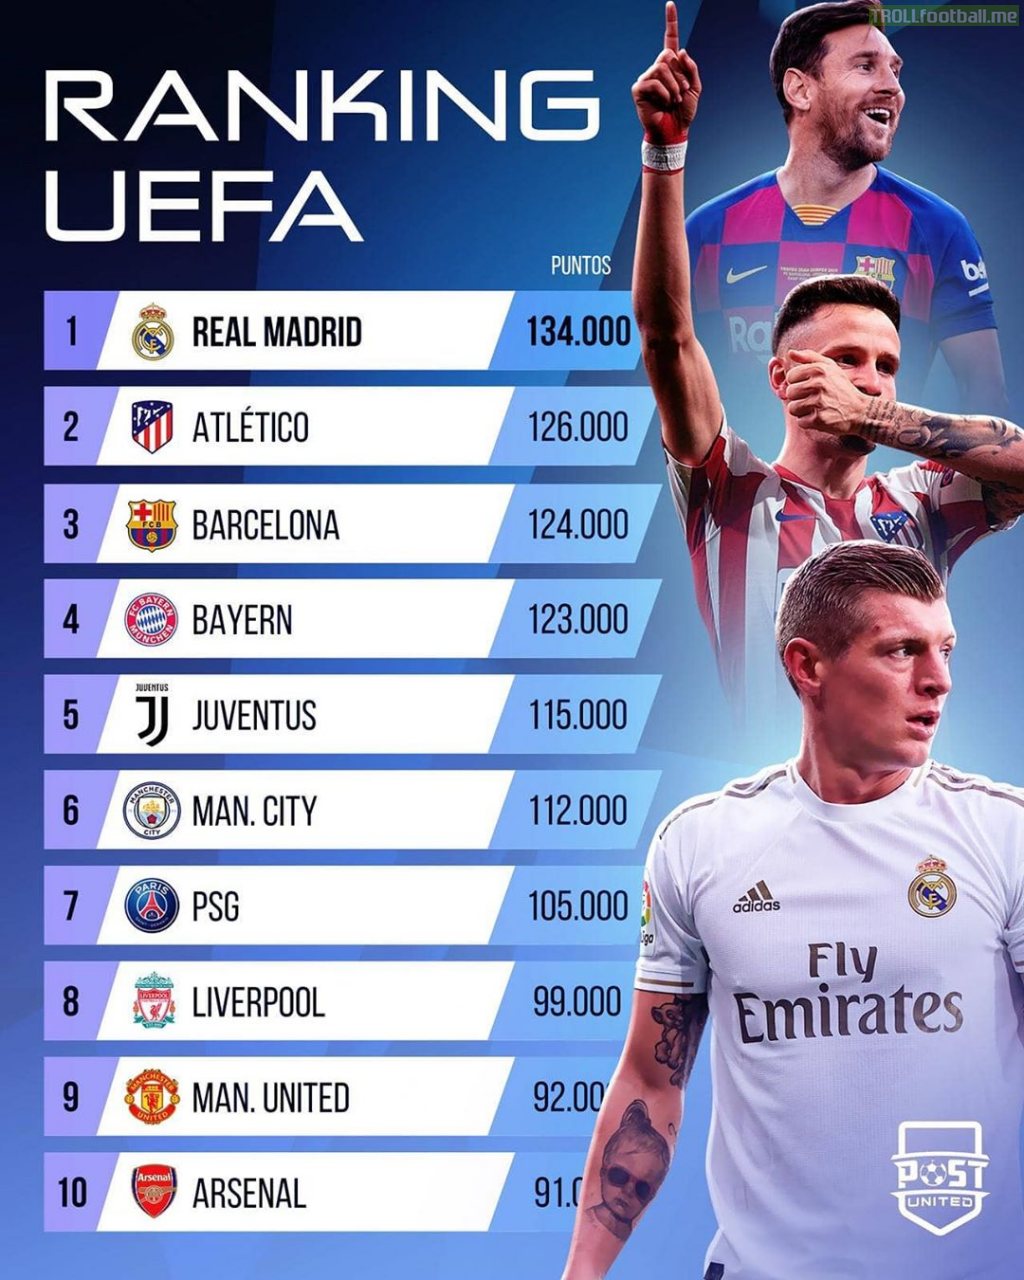 Current UEFA Coefficient ranking for top 10 clubs